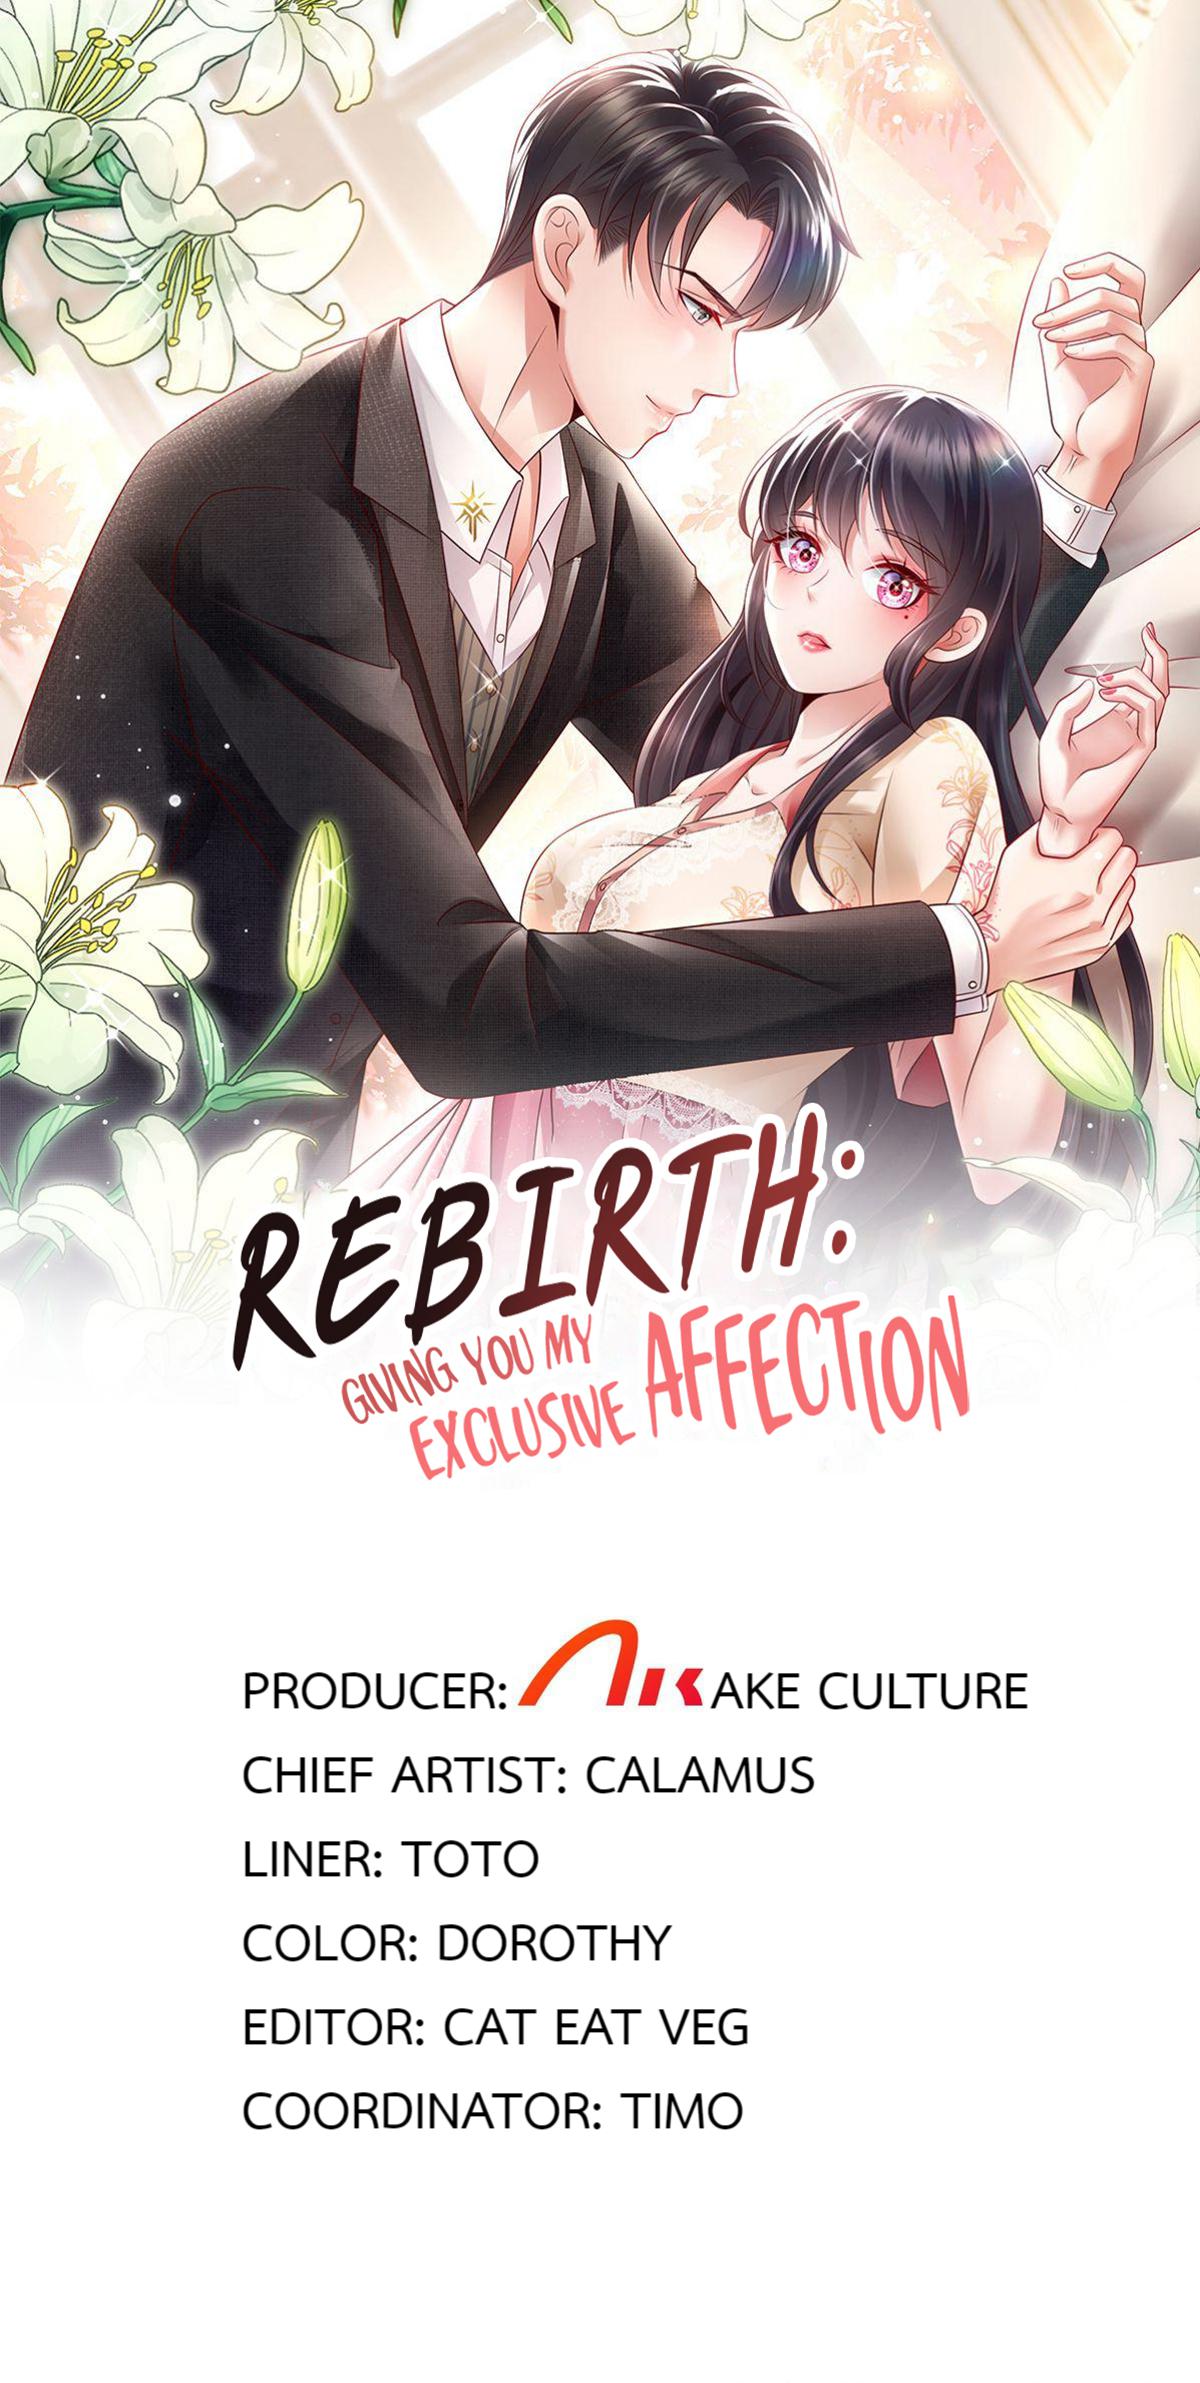 Rebirth: Giving You My Exclusive Affection 45.1 Savior